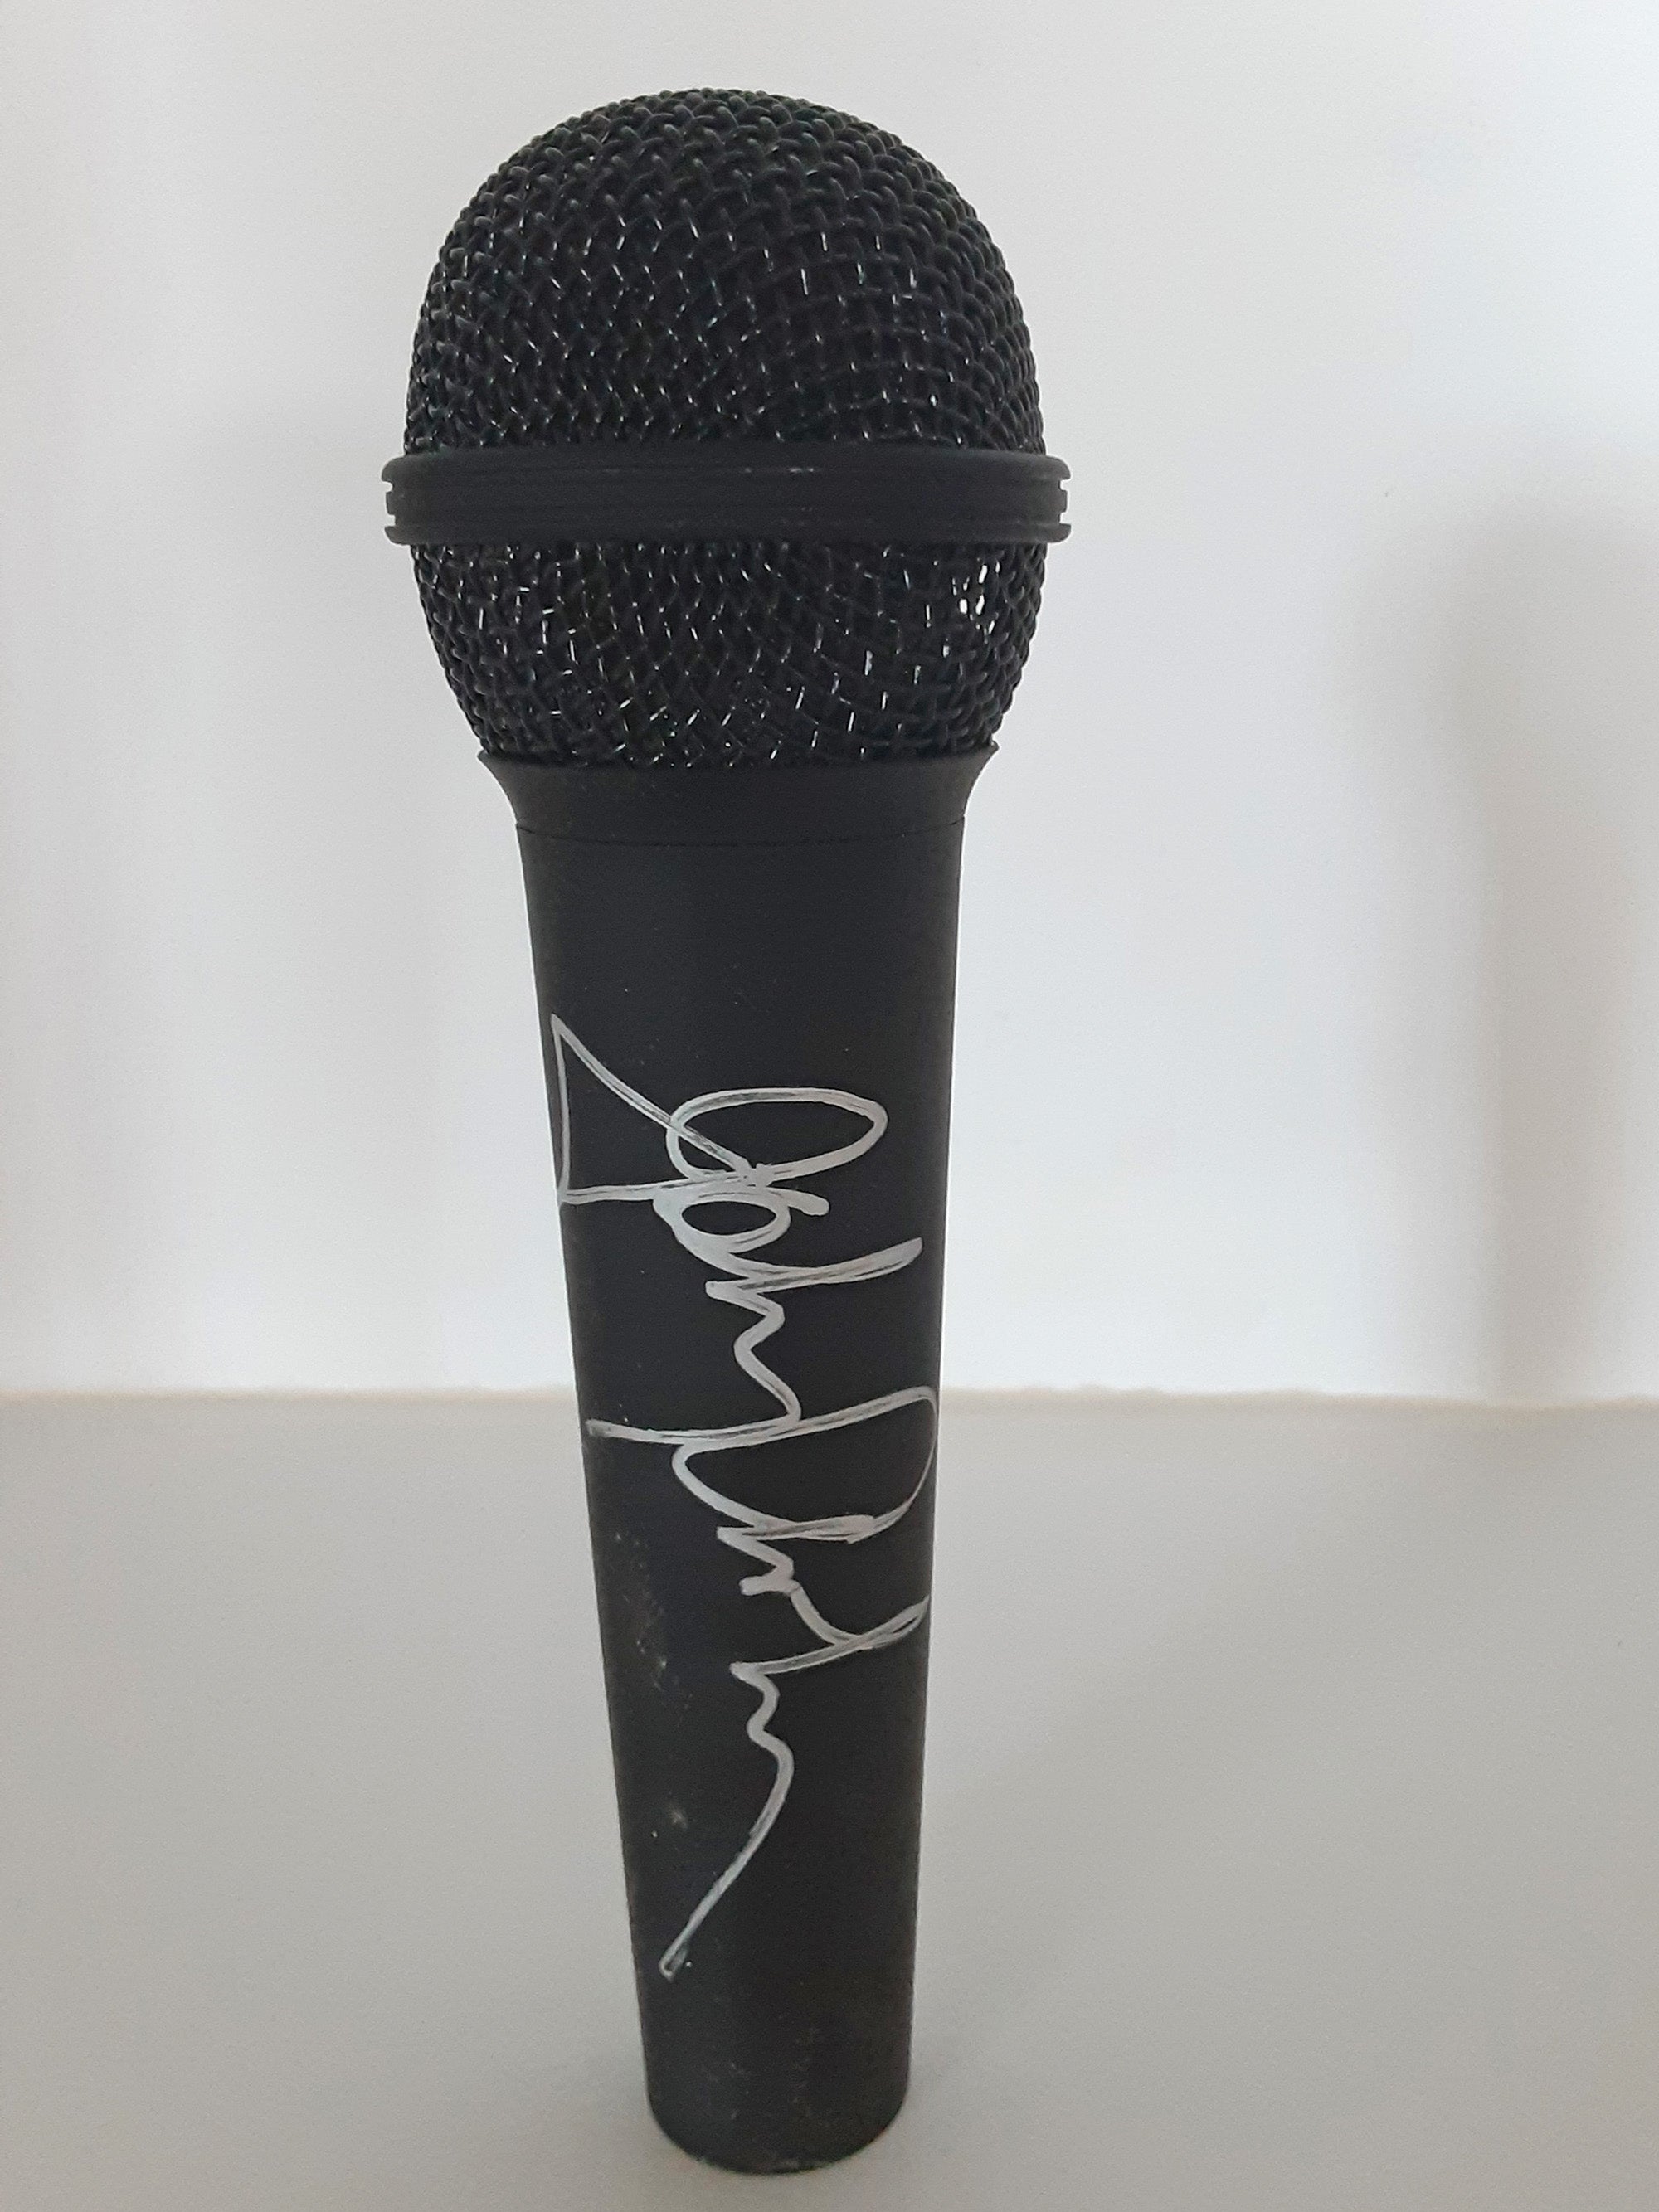 Johnny Cash microphone signed with proof